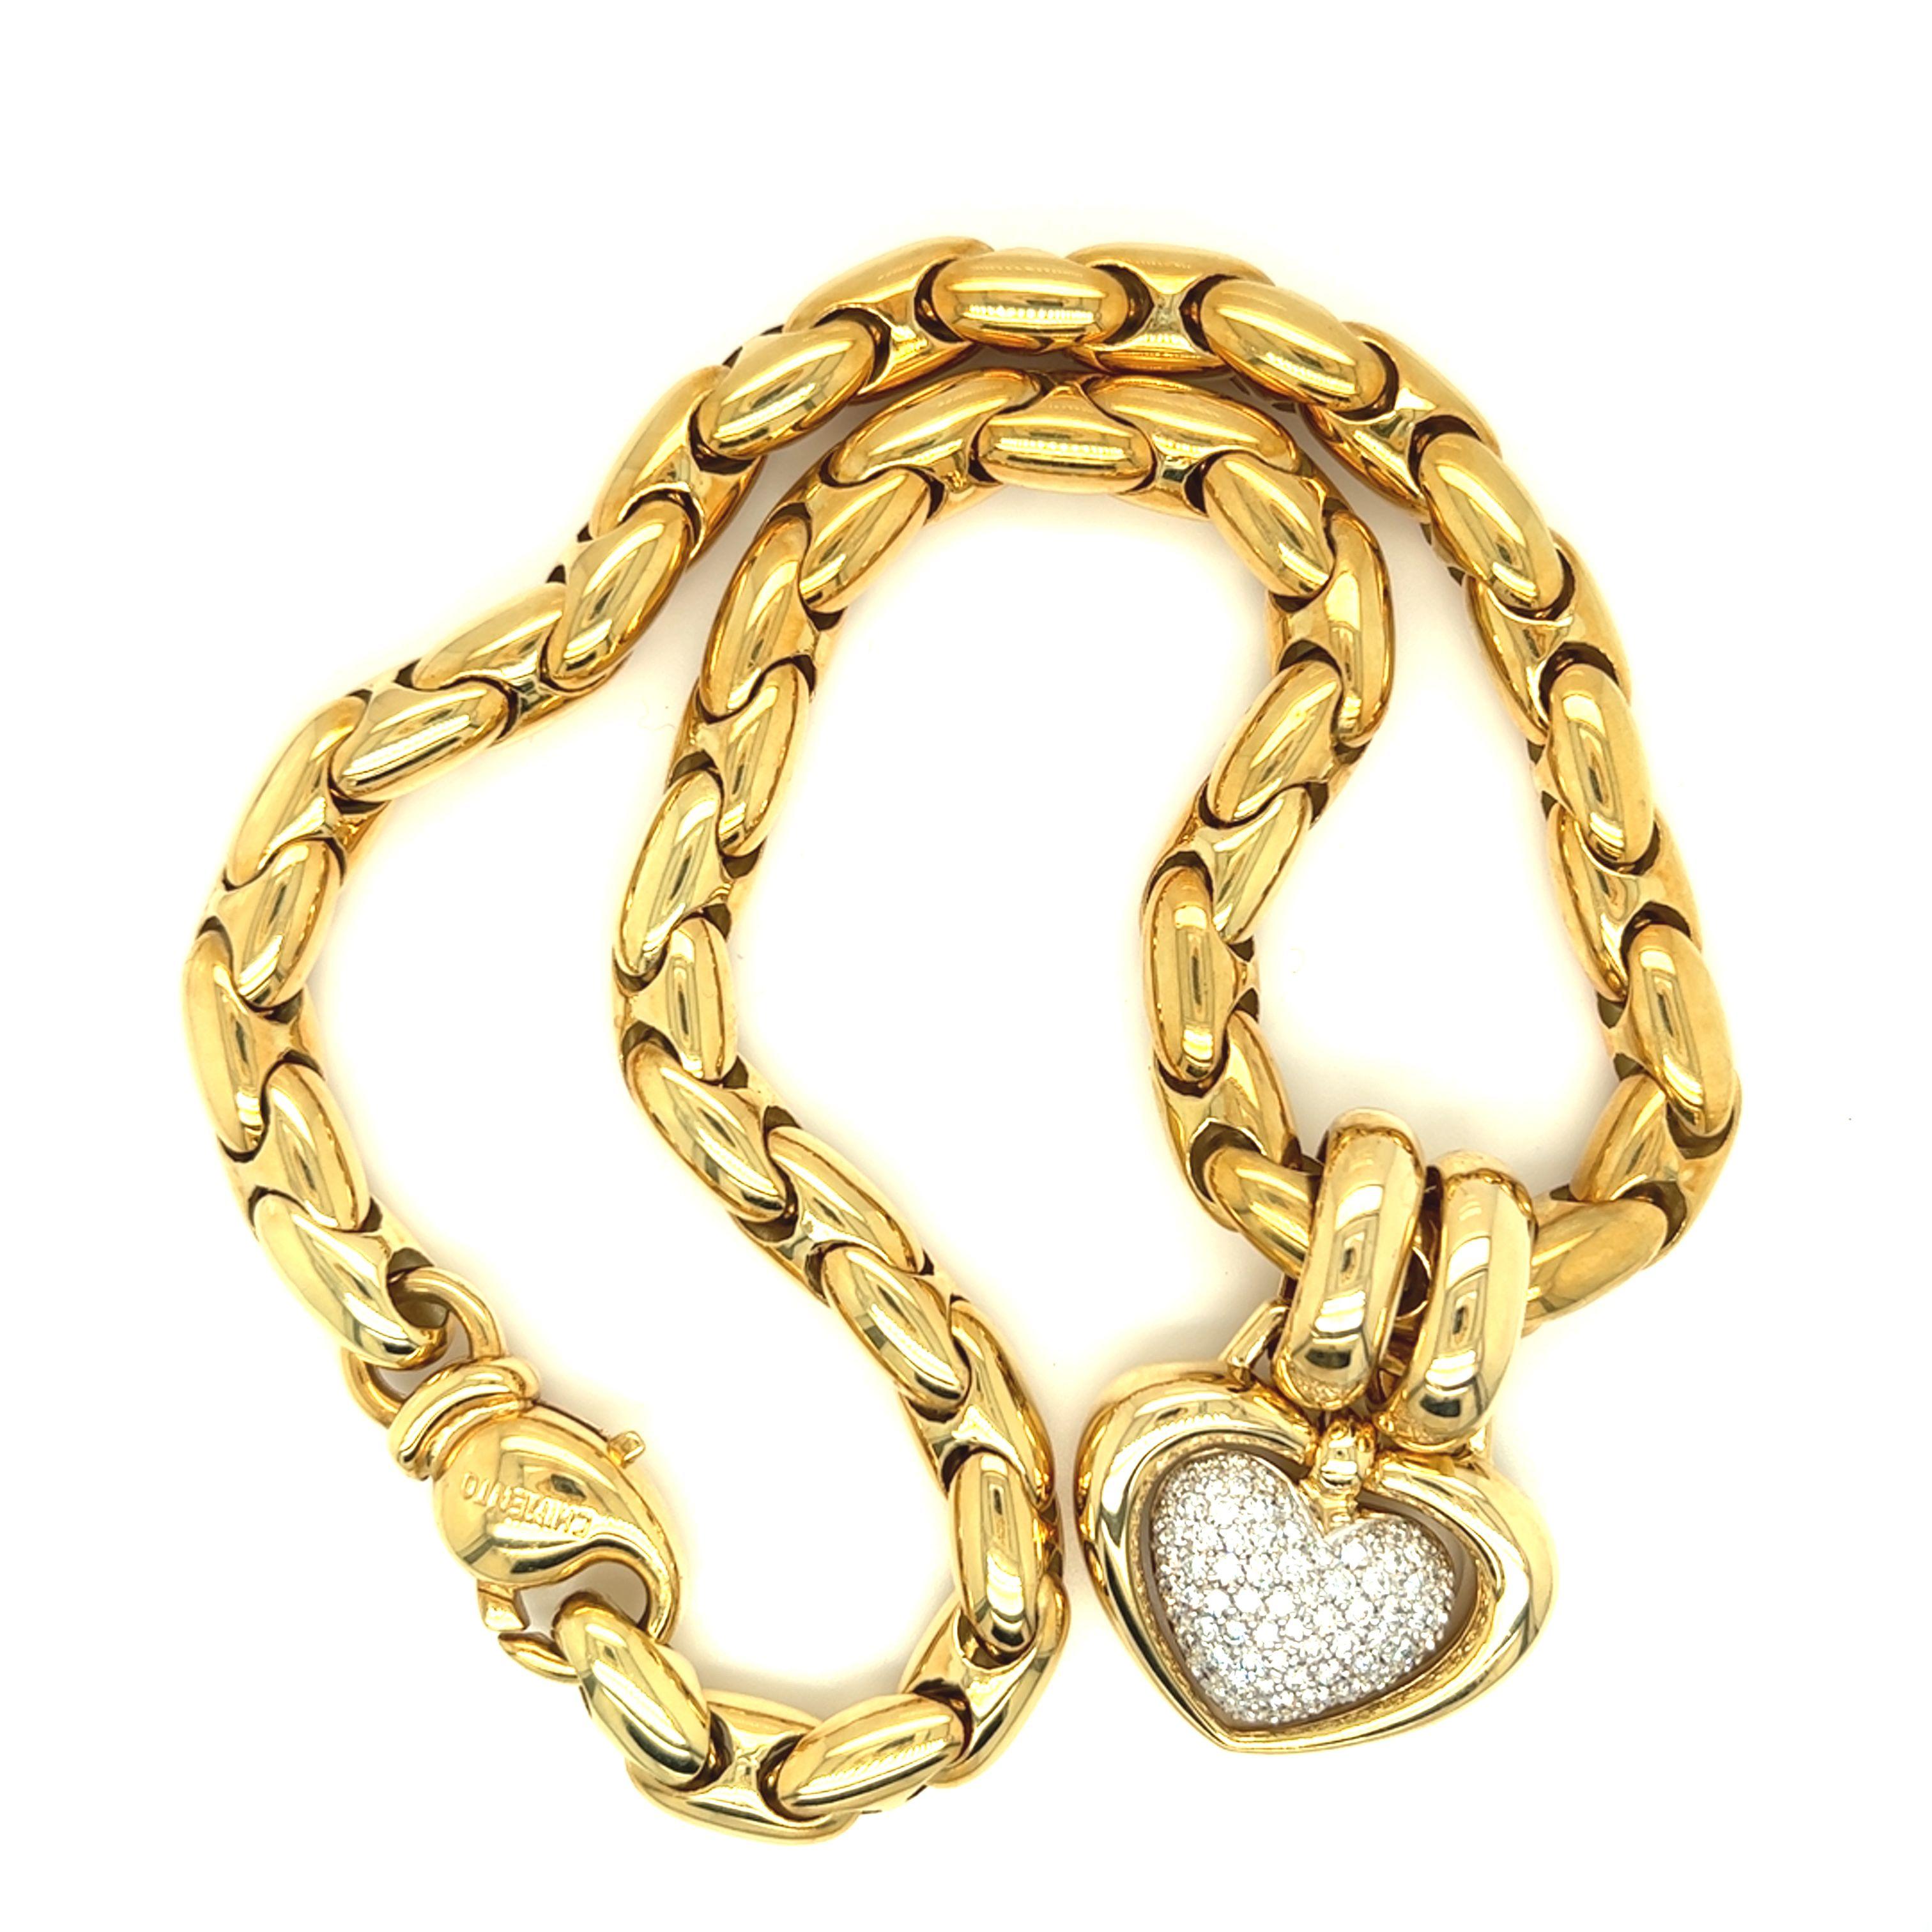 Pavé diamond heart pendant with necklace by Chimento of Vicenza, Italy. The pendant has approximately 2 carats of round brilliant diamond and is encased in a puffy yellow gold surround. There is double connector rings which are quite large (12mm) so